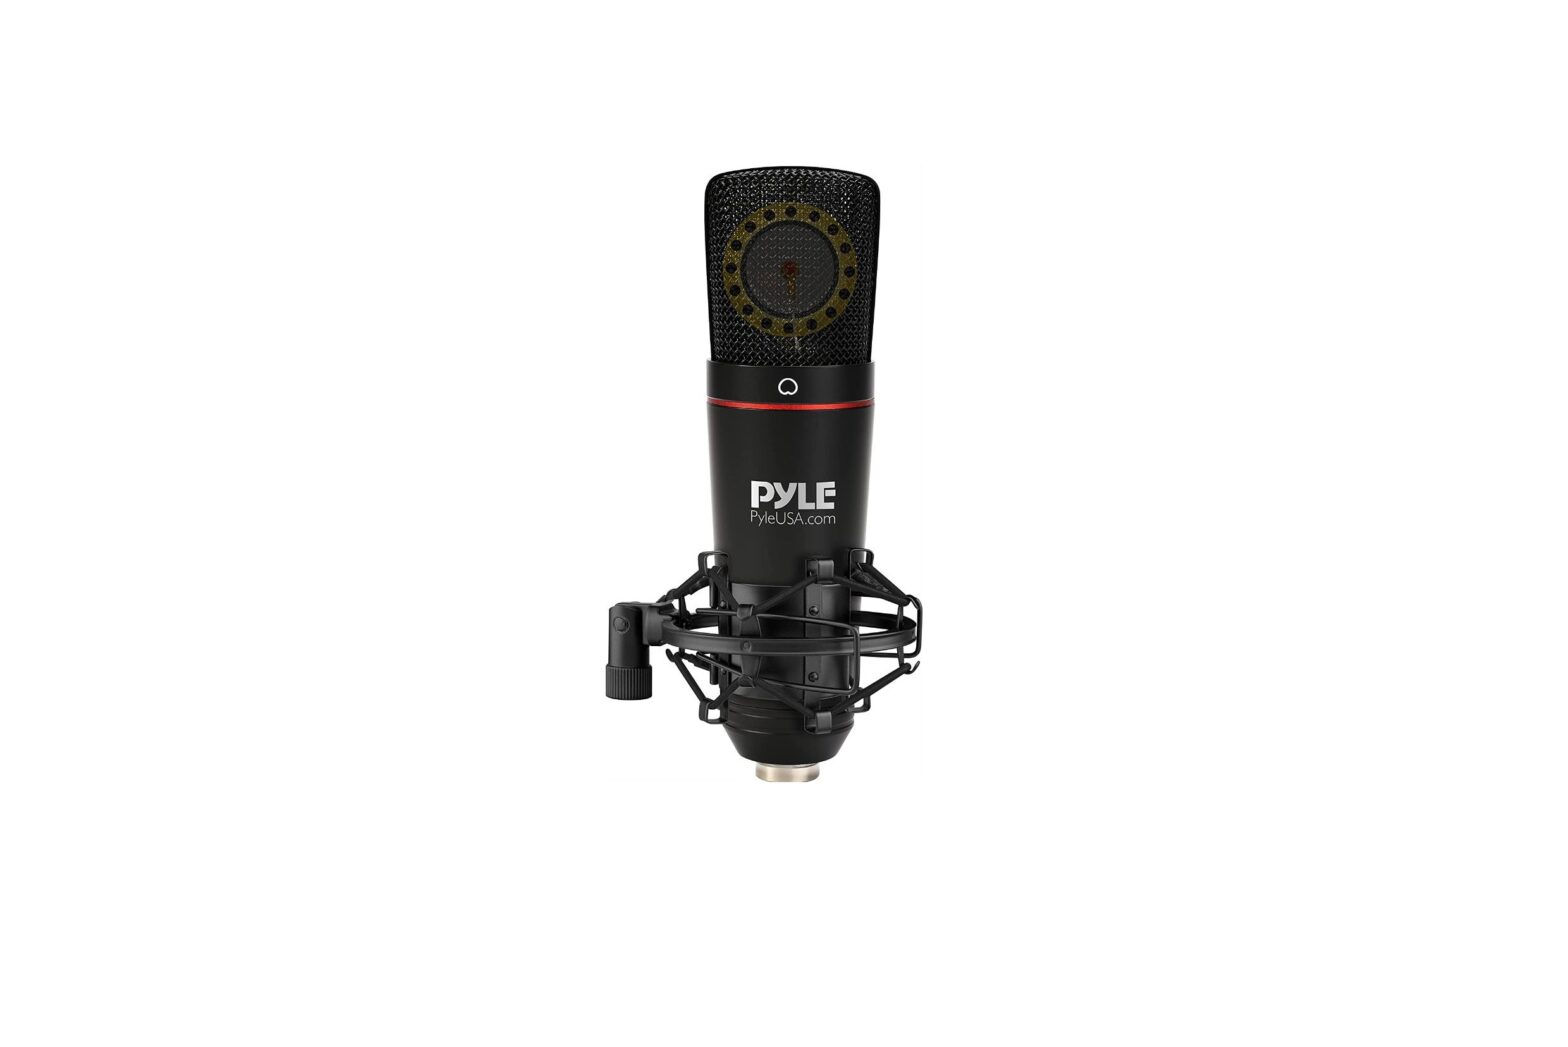 Pyle PDMILCM100 Professional Studio Microphone User Manual - Featured image